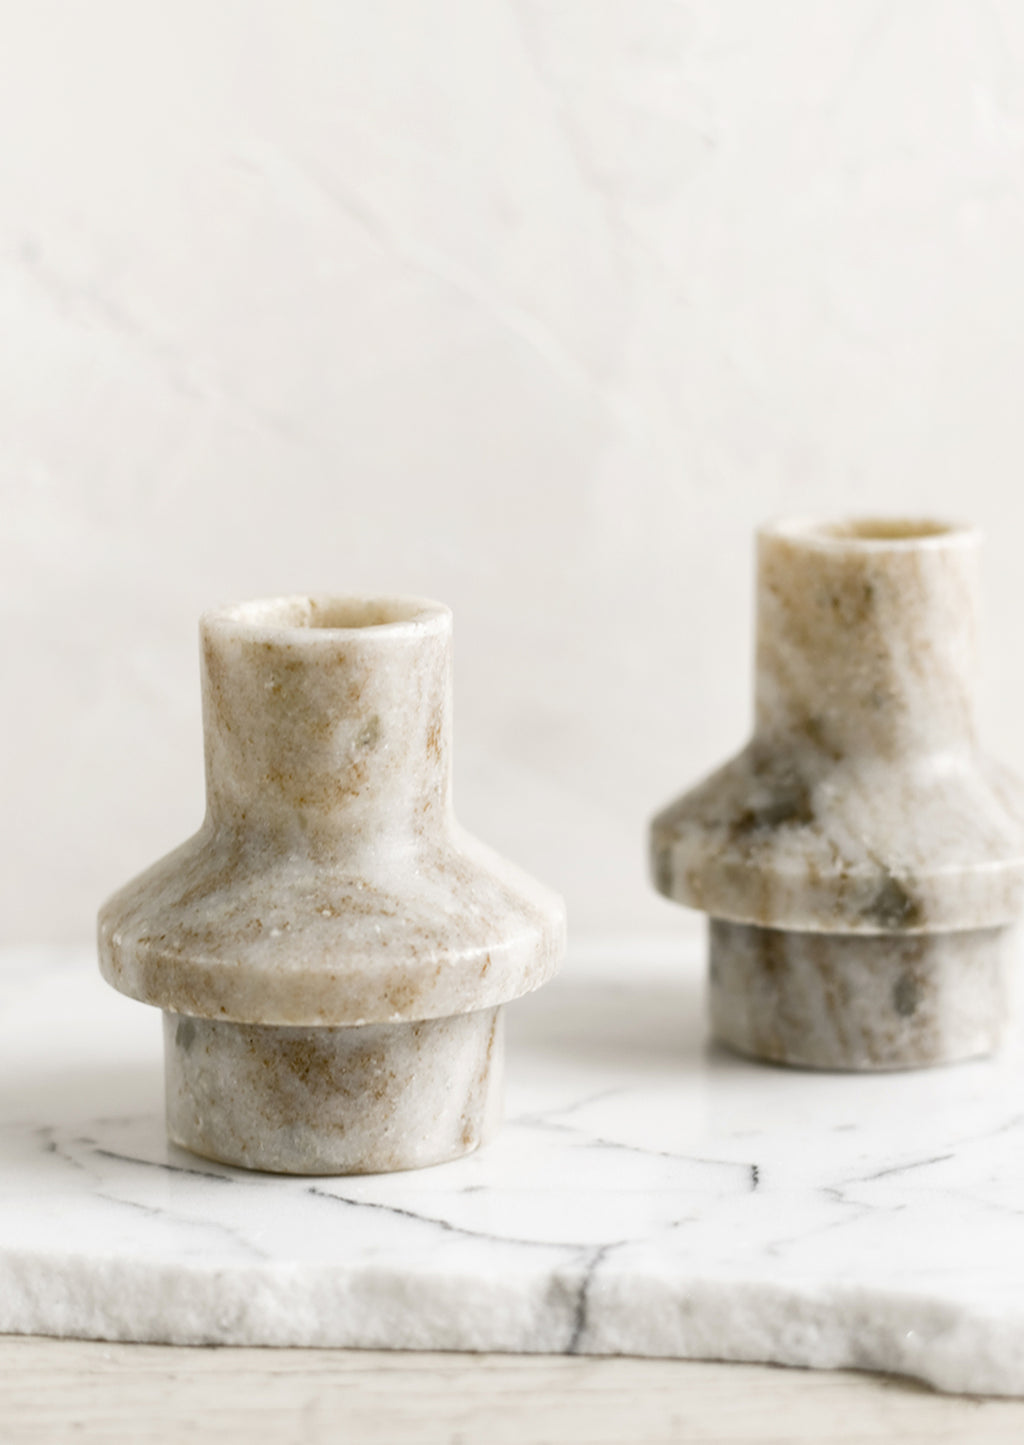 1: A taper candle holder in tan colored marble with sculptured shape.